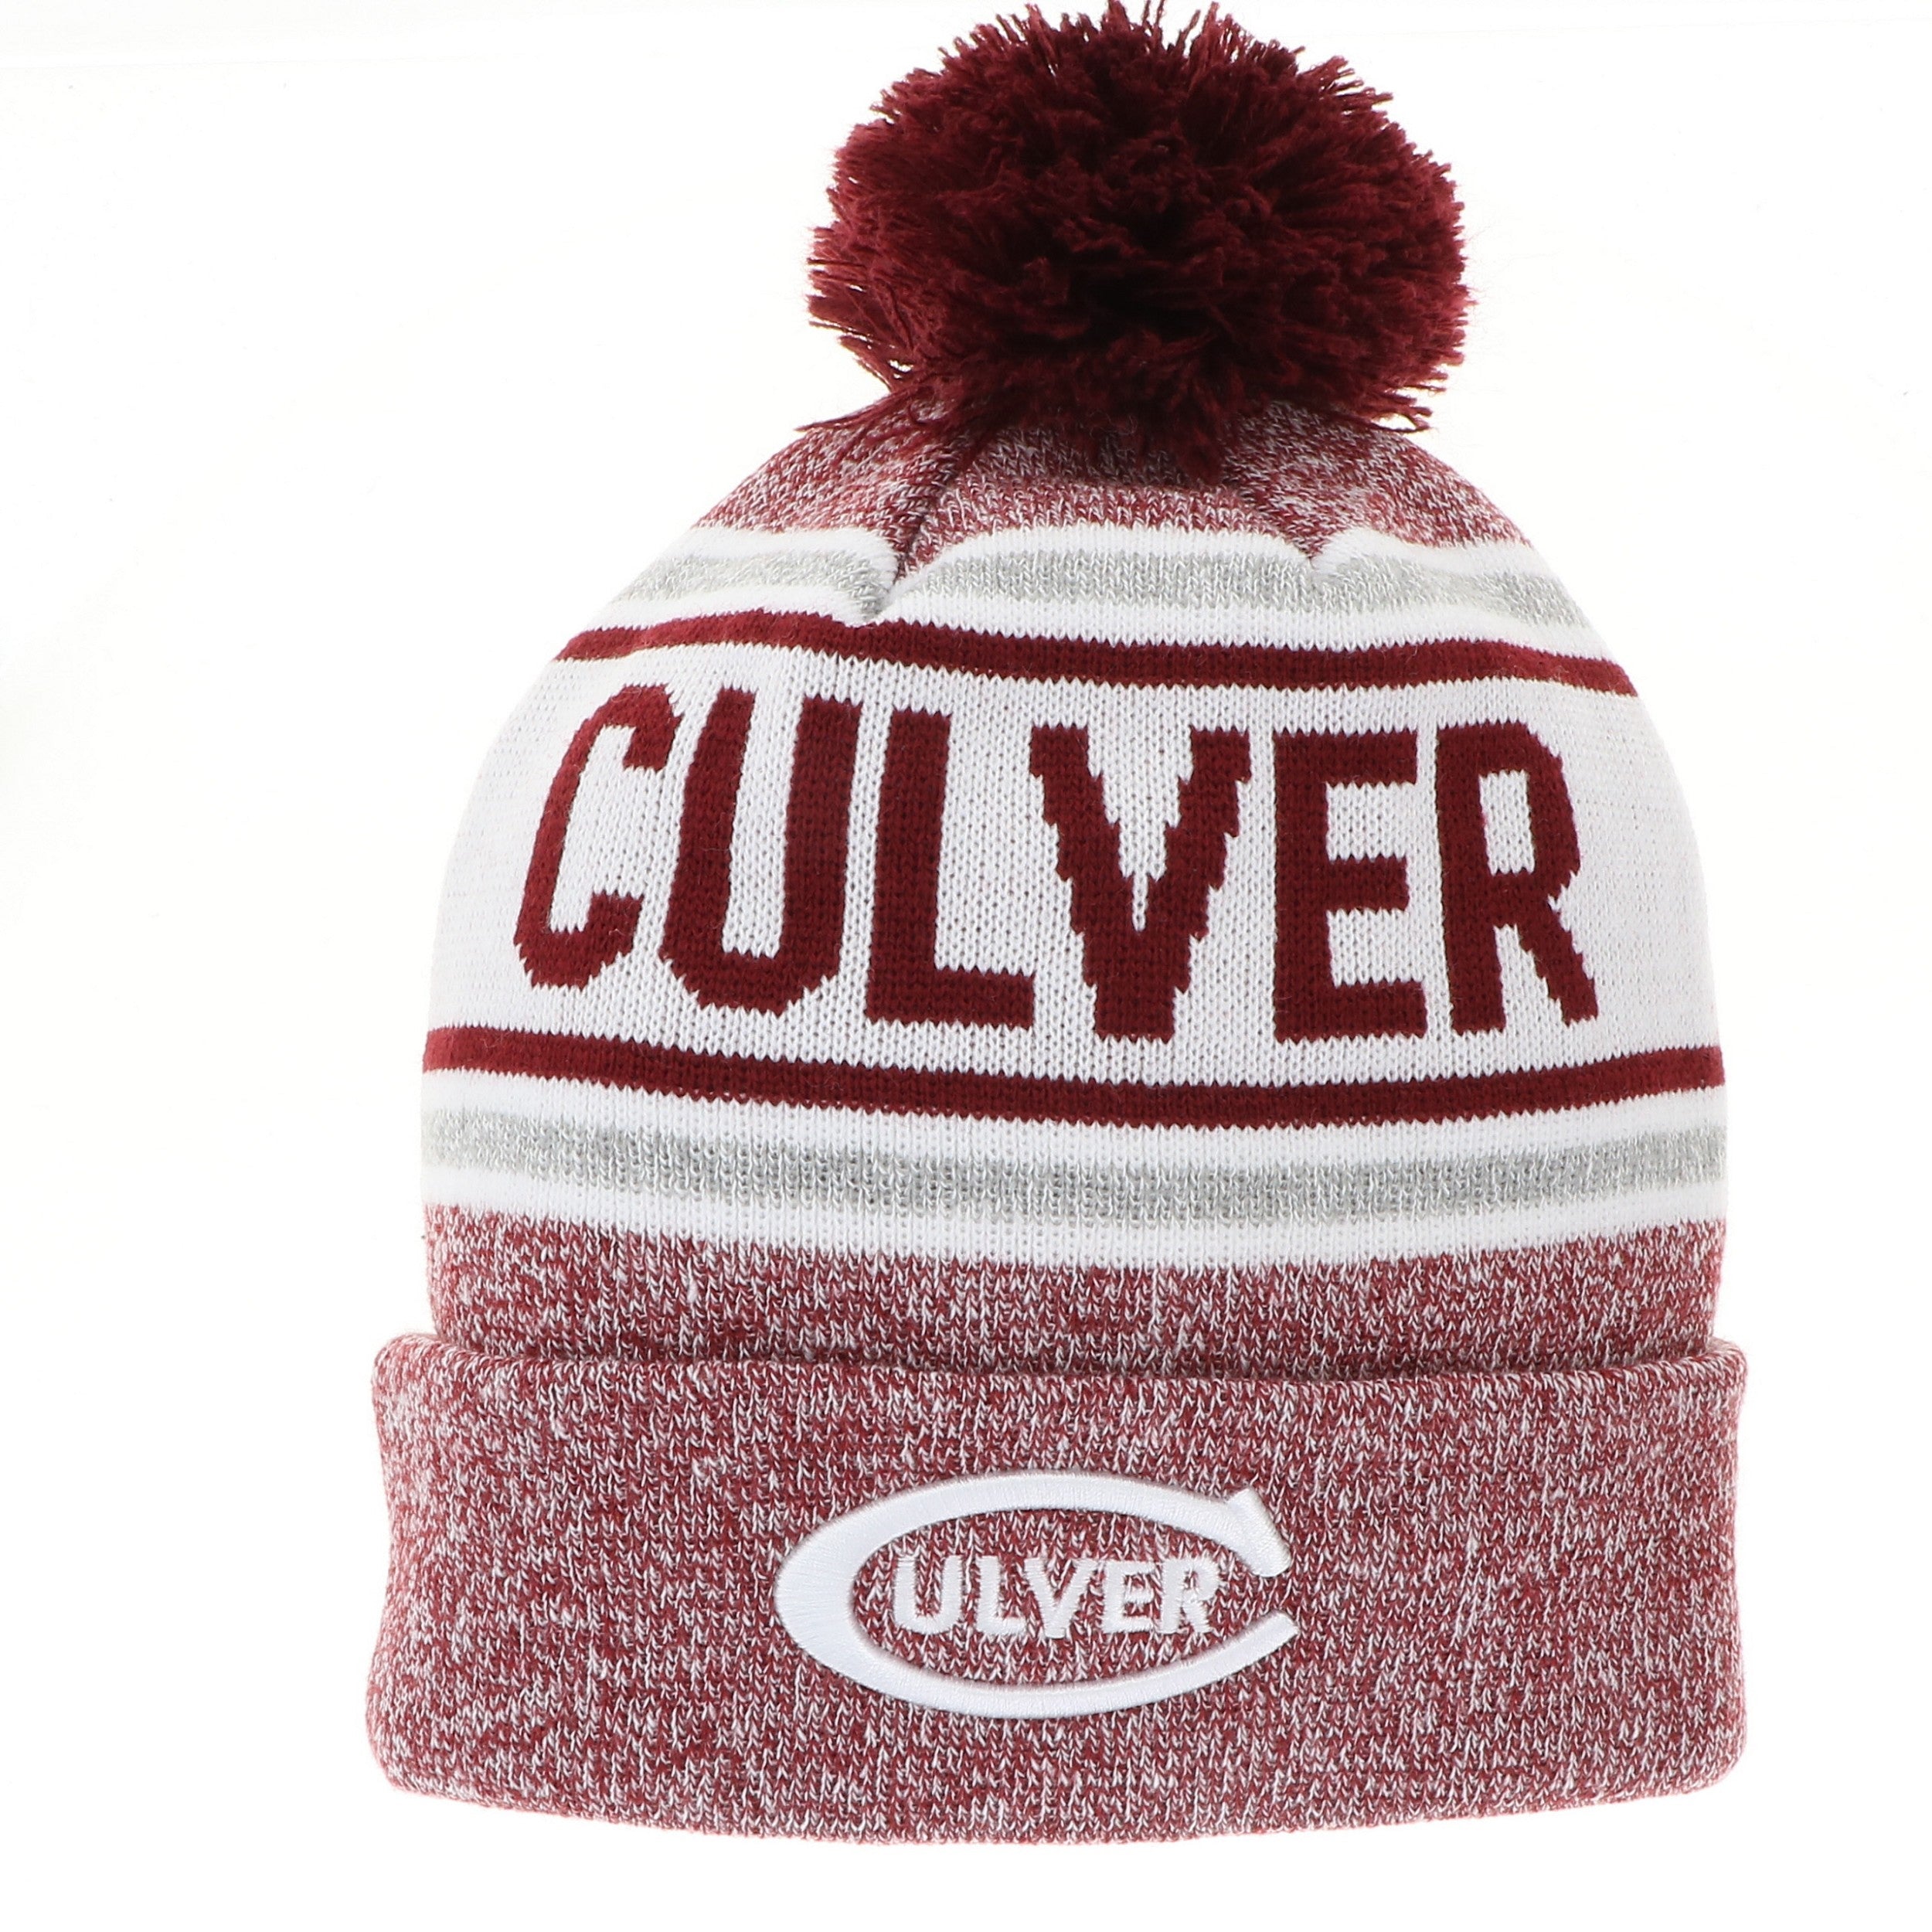 Tailgate Marled Knit-In Cufff Beanie with Pom - Culver eagles